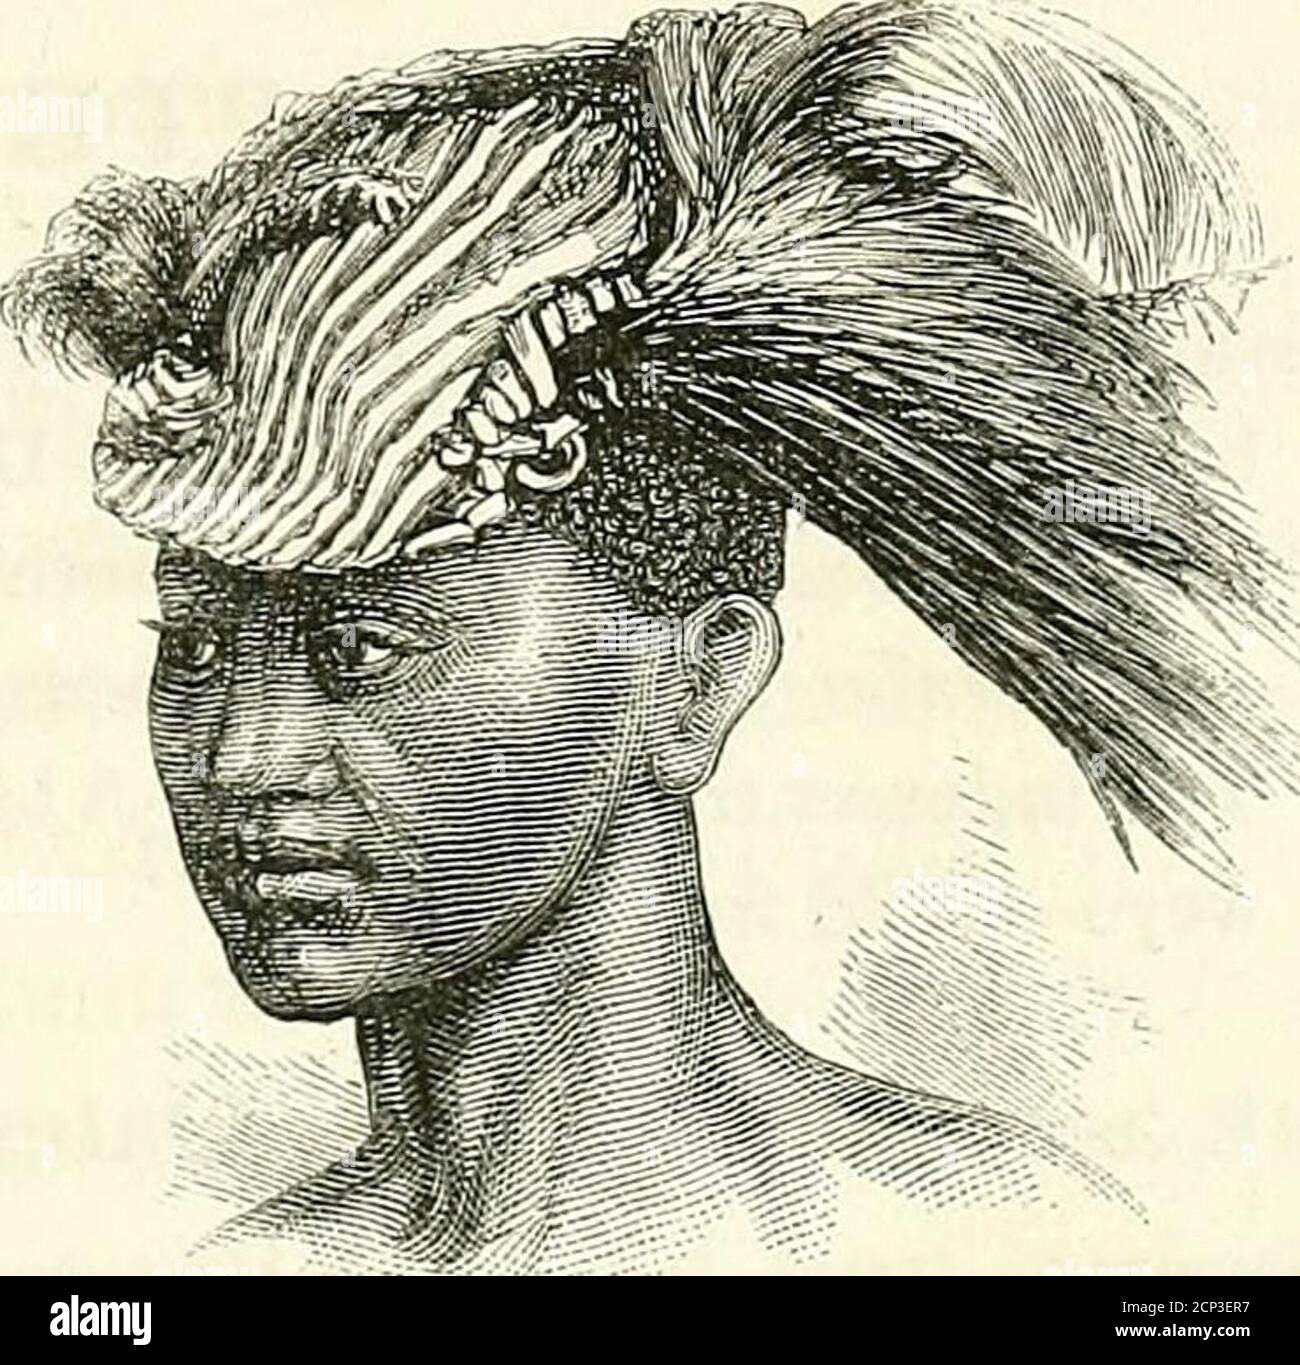 . Matabele land and the Victoria Falls : a naturalist's wanderings in the interior of South Africa, from the letters and journals of the late Frank Oates . FEATHER HEAD-DRESS. KUMALA RIVER. 57. River, now dry, which we crossed, outspanning amile or two further on. The country here is open,park-hke, and undulating, extending away in anearly level plain to the right. After we hadstopped, a numberof impudent Kafirscrowded round thewagfo-on. One madea fearful row, at lastcoming to entreaties,saying we had set theveldt on fire. Starting again at4 P.M., we next wentover rising ground,the country get Stock Photo